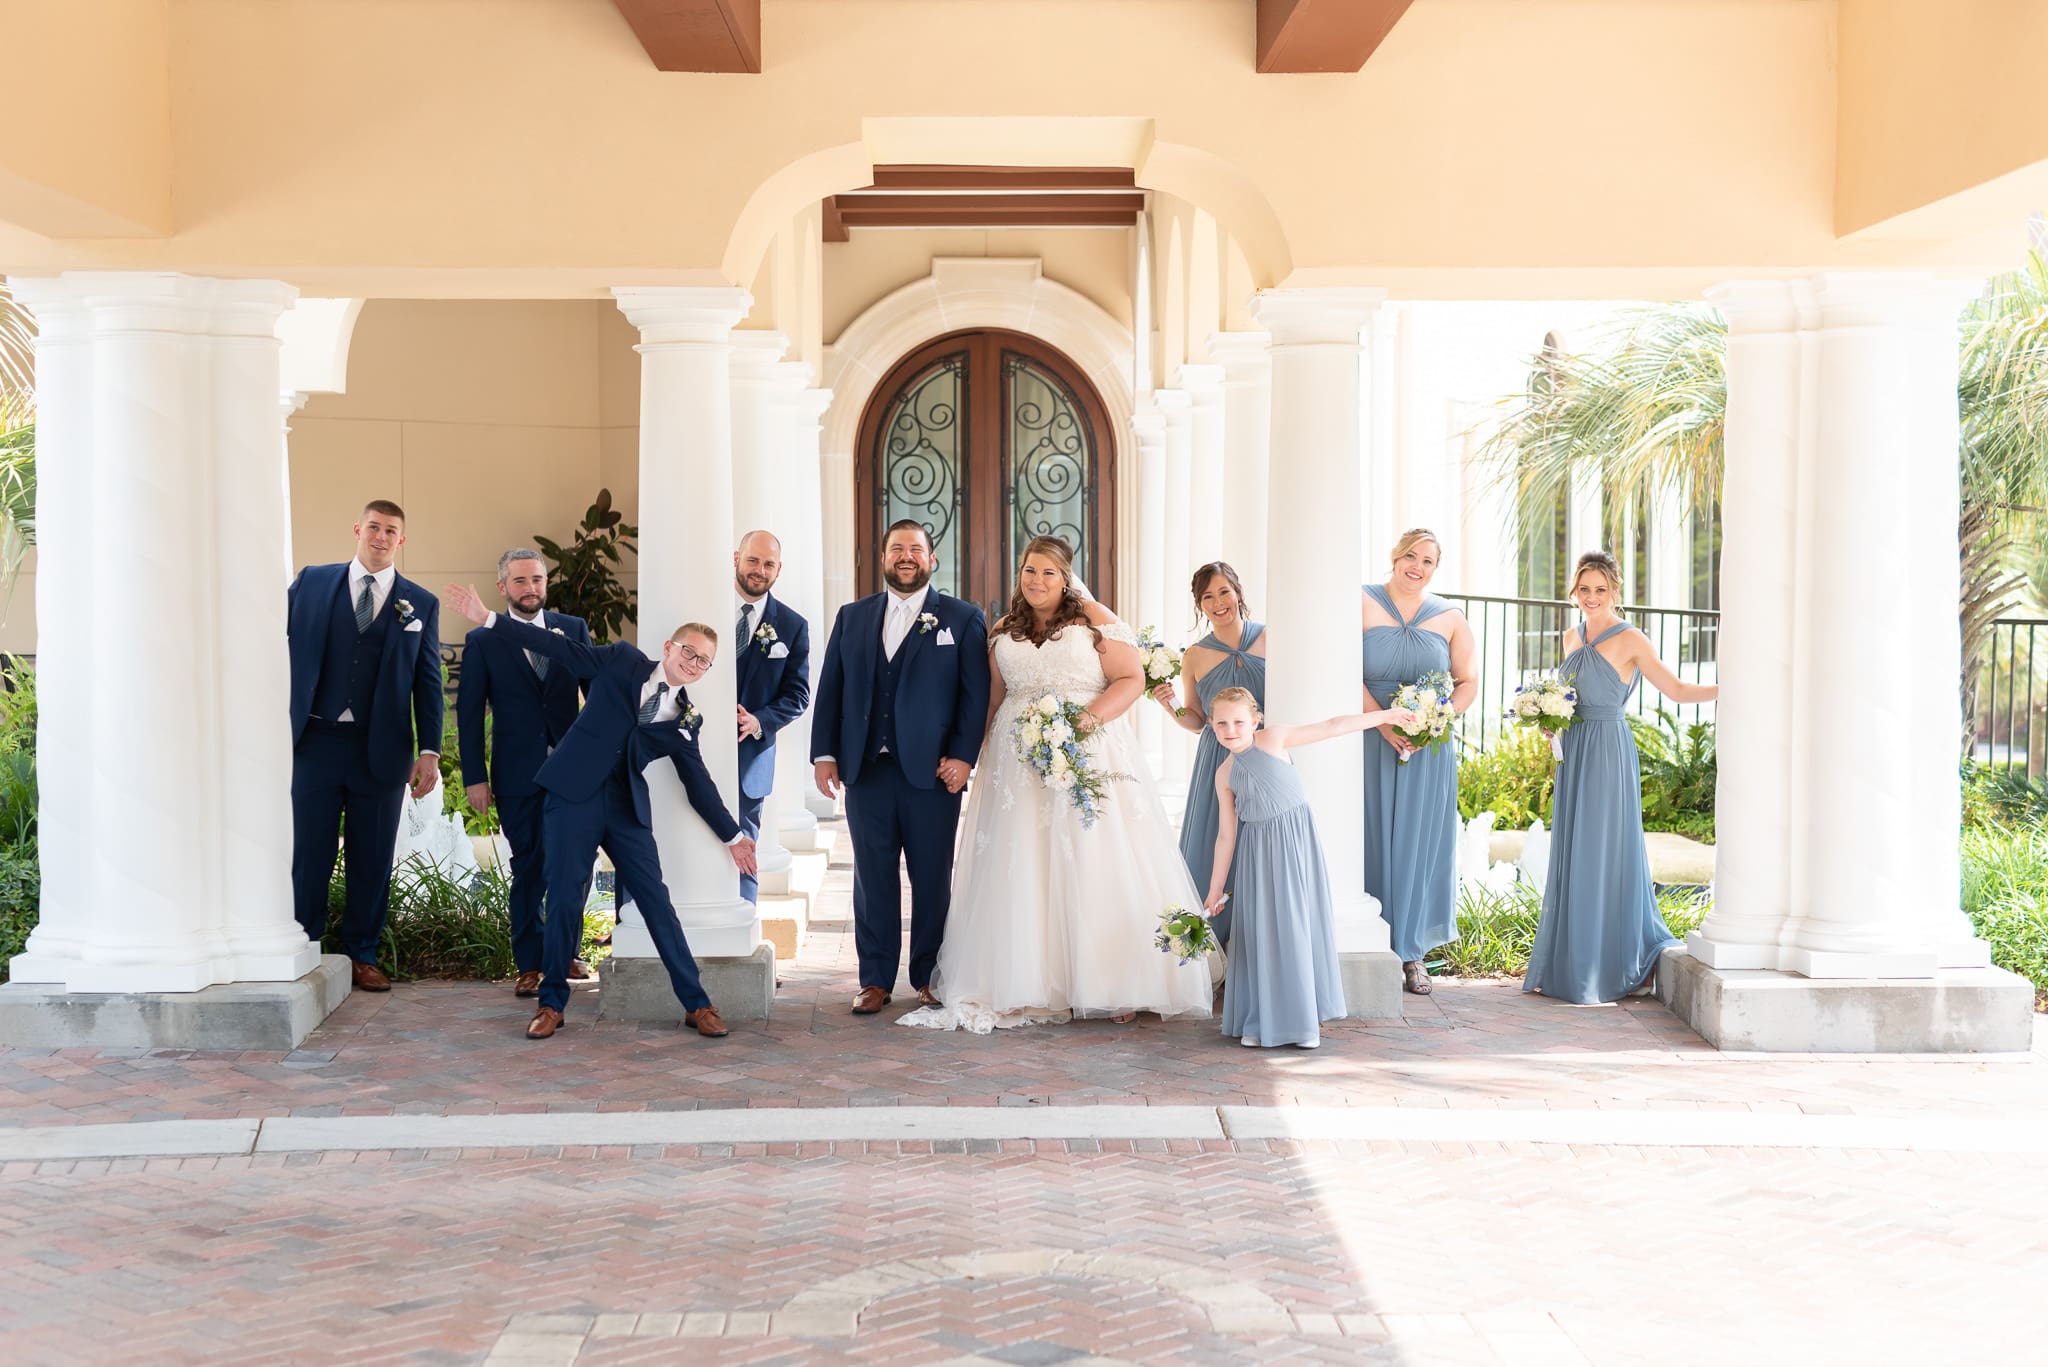 Fun picture with the wedding party in front of the clubhouse - Grande Dunes Ocean Club